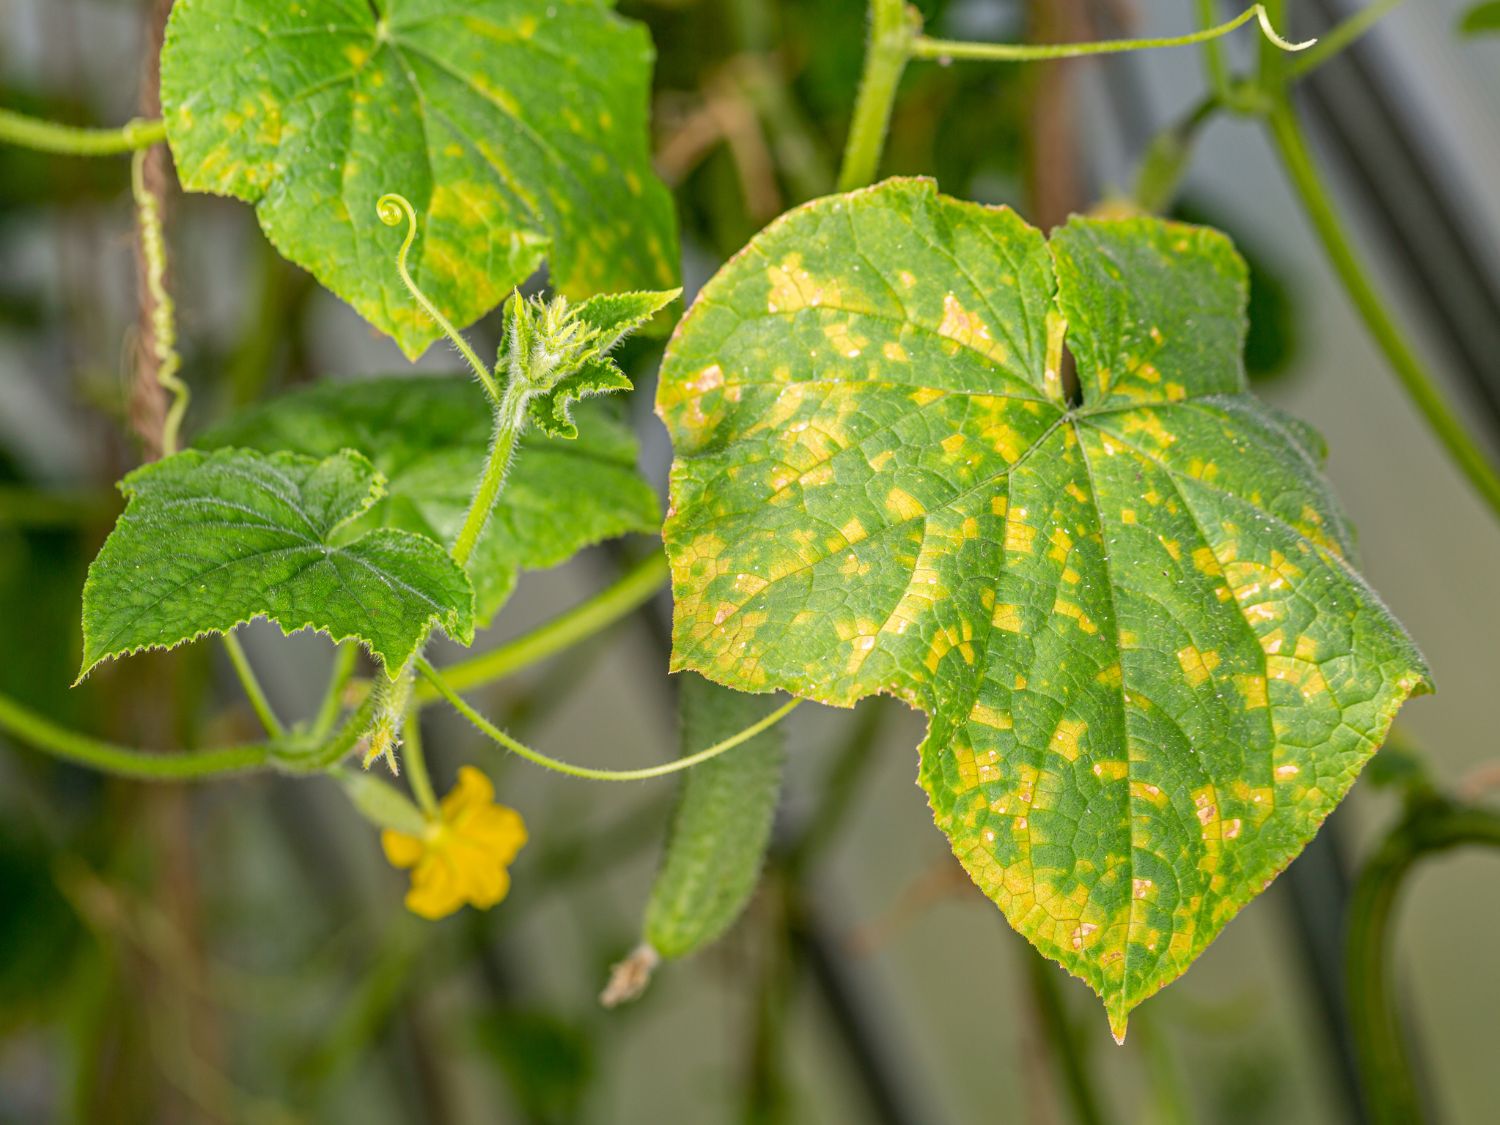 A close up view of cucumber disease turning cucumber leaf yellow